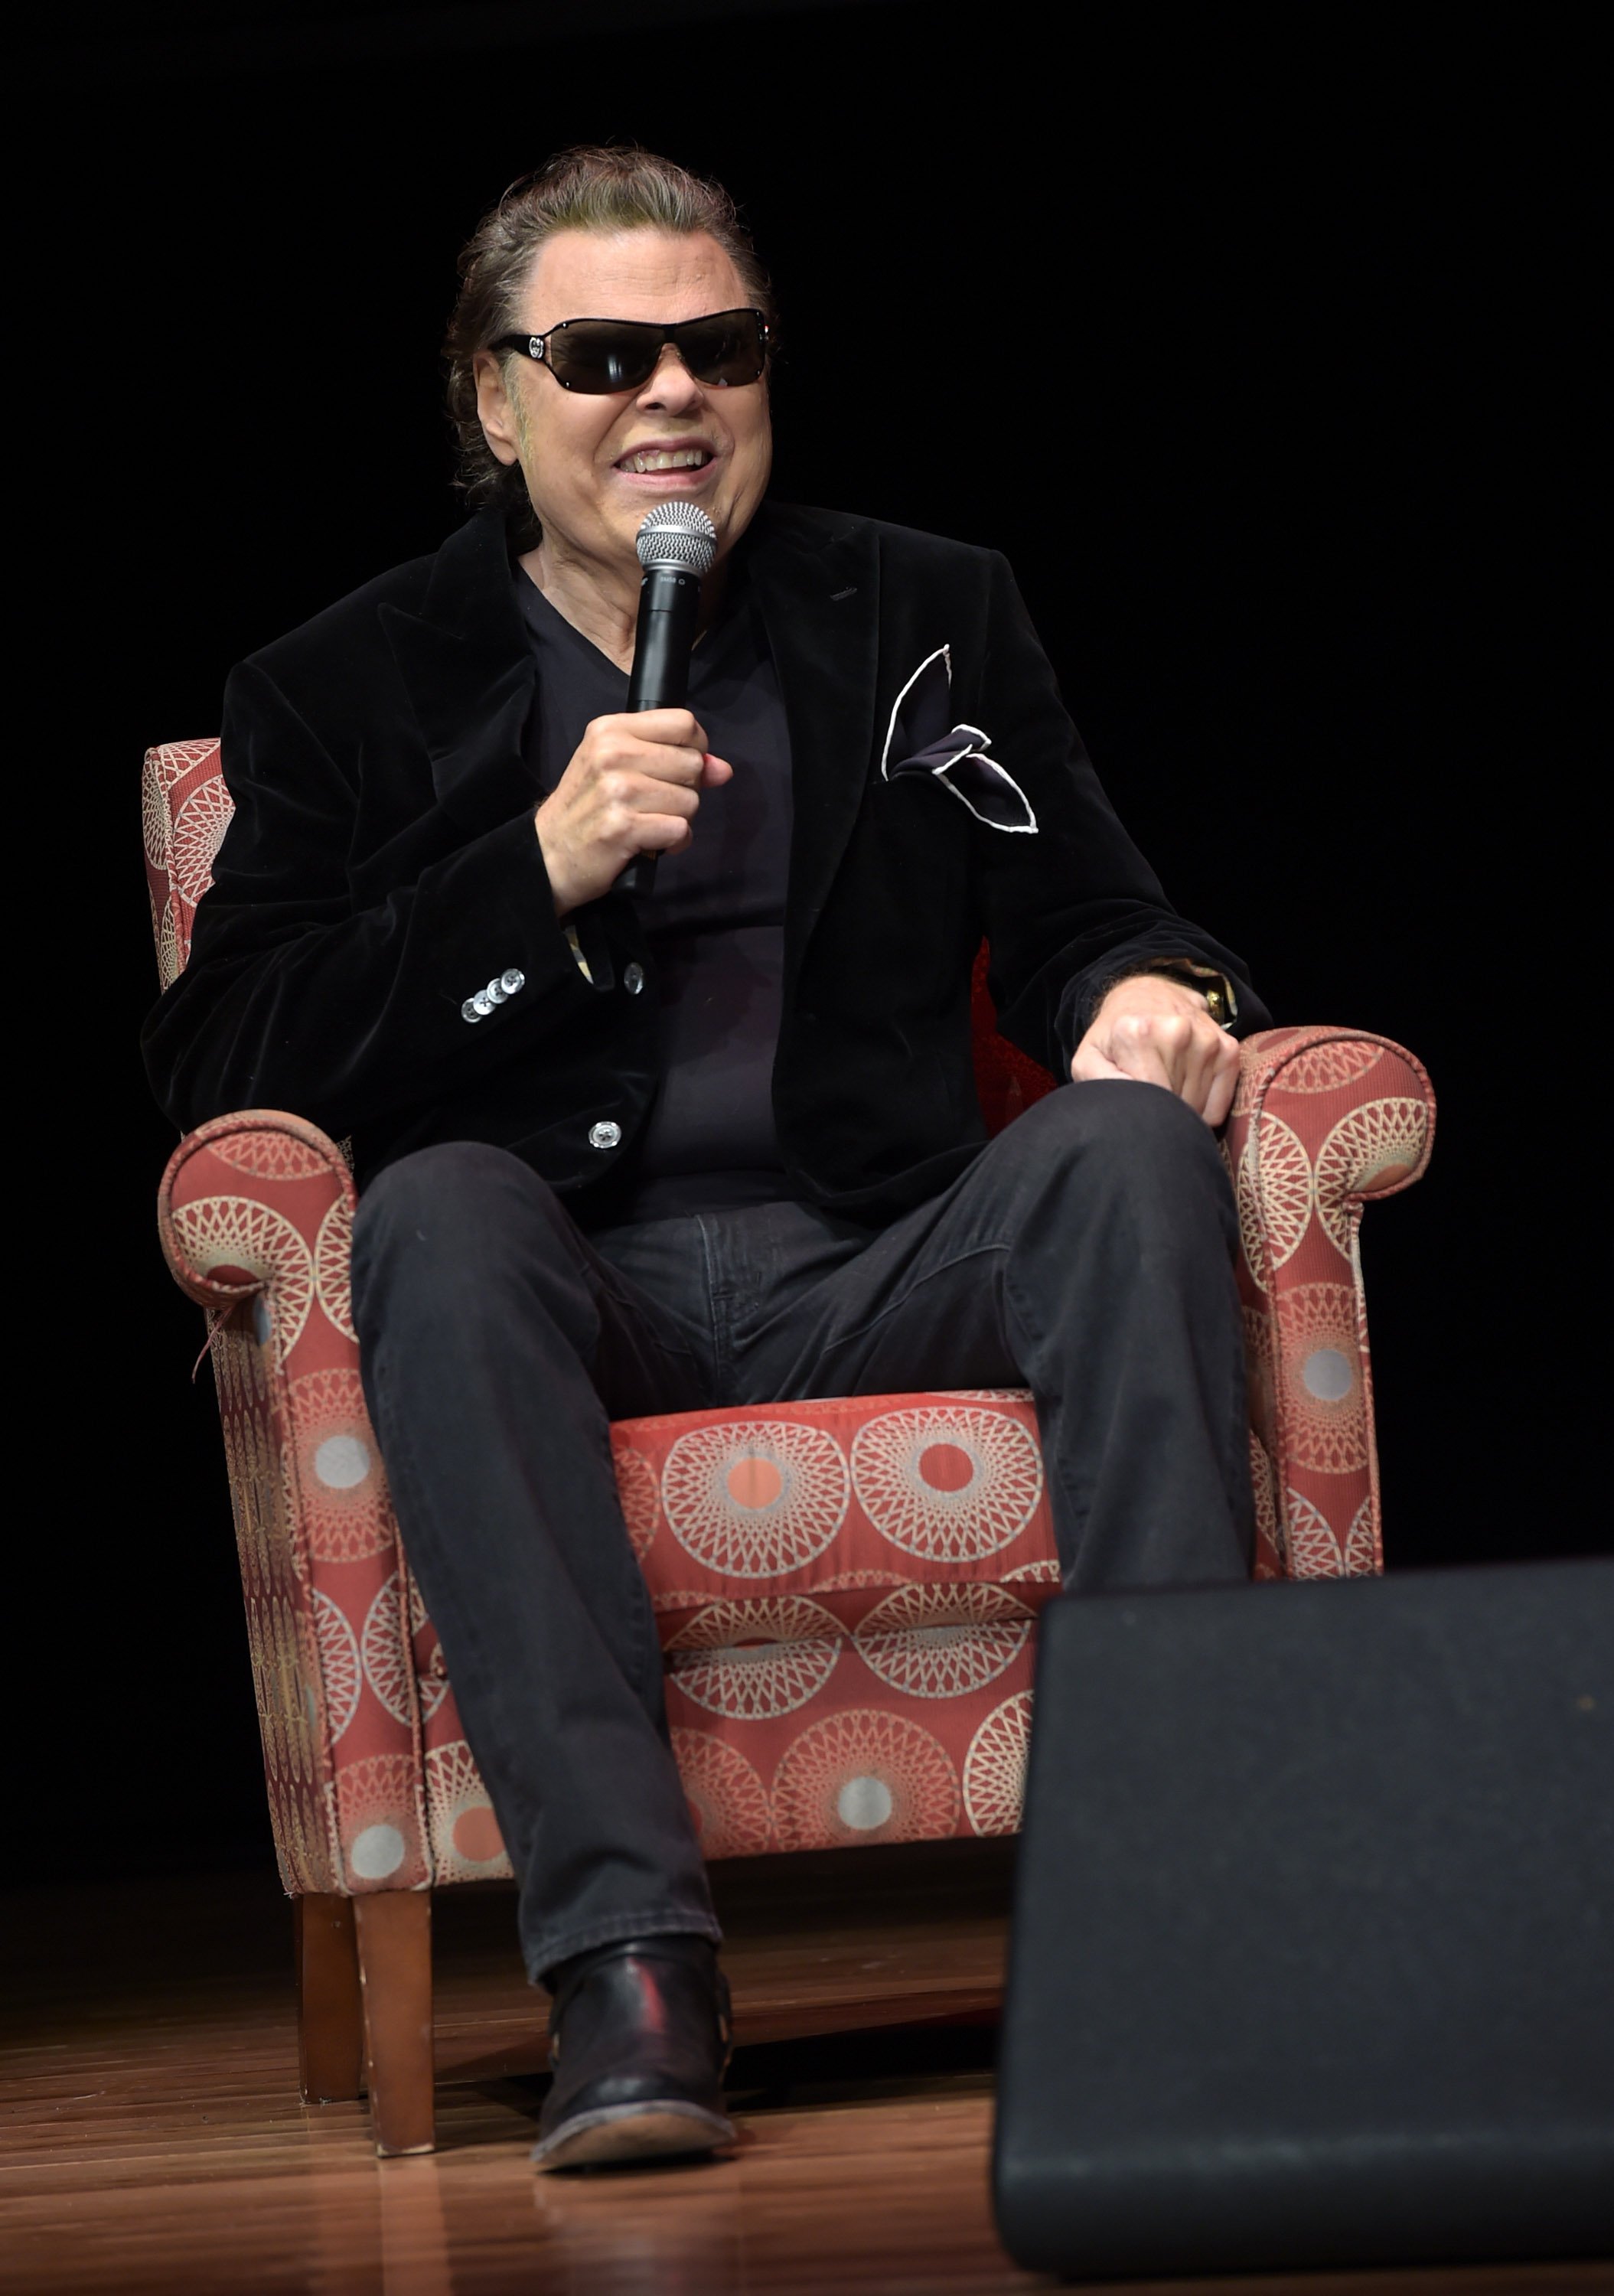 Ronnie Milsap at the Q&A in his honor presented by the Country Music Hall Of Fame and Museum on February 7, 2015, in Nashville | Source: Getty Images